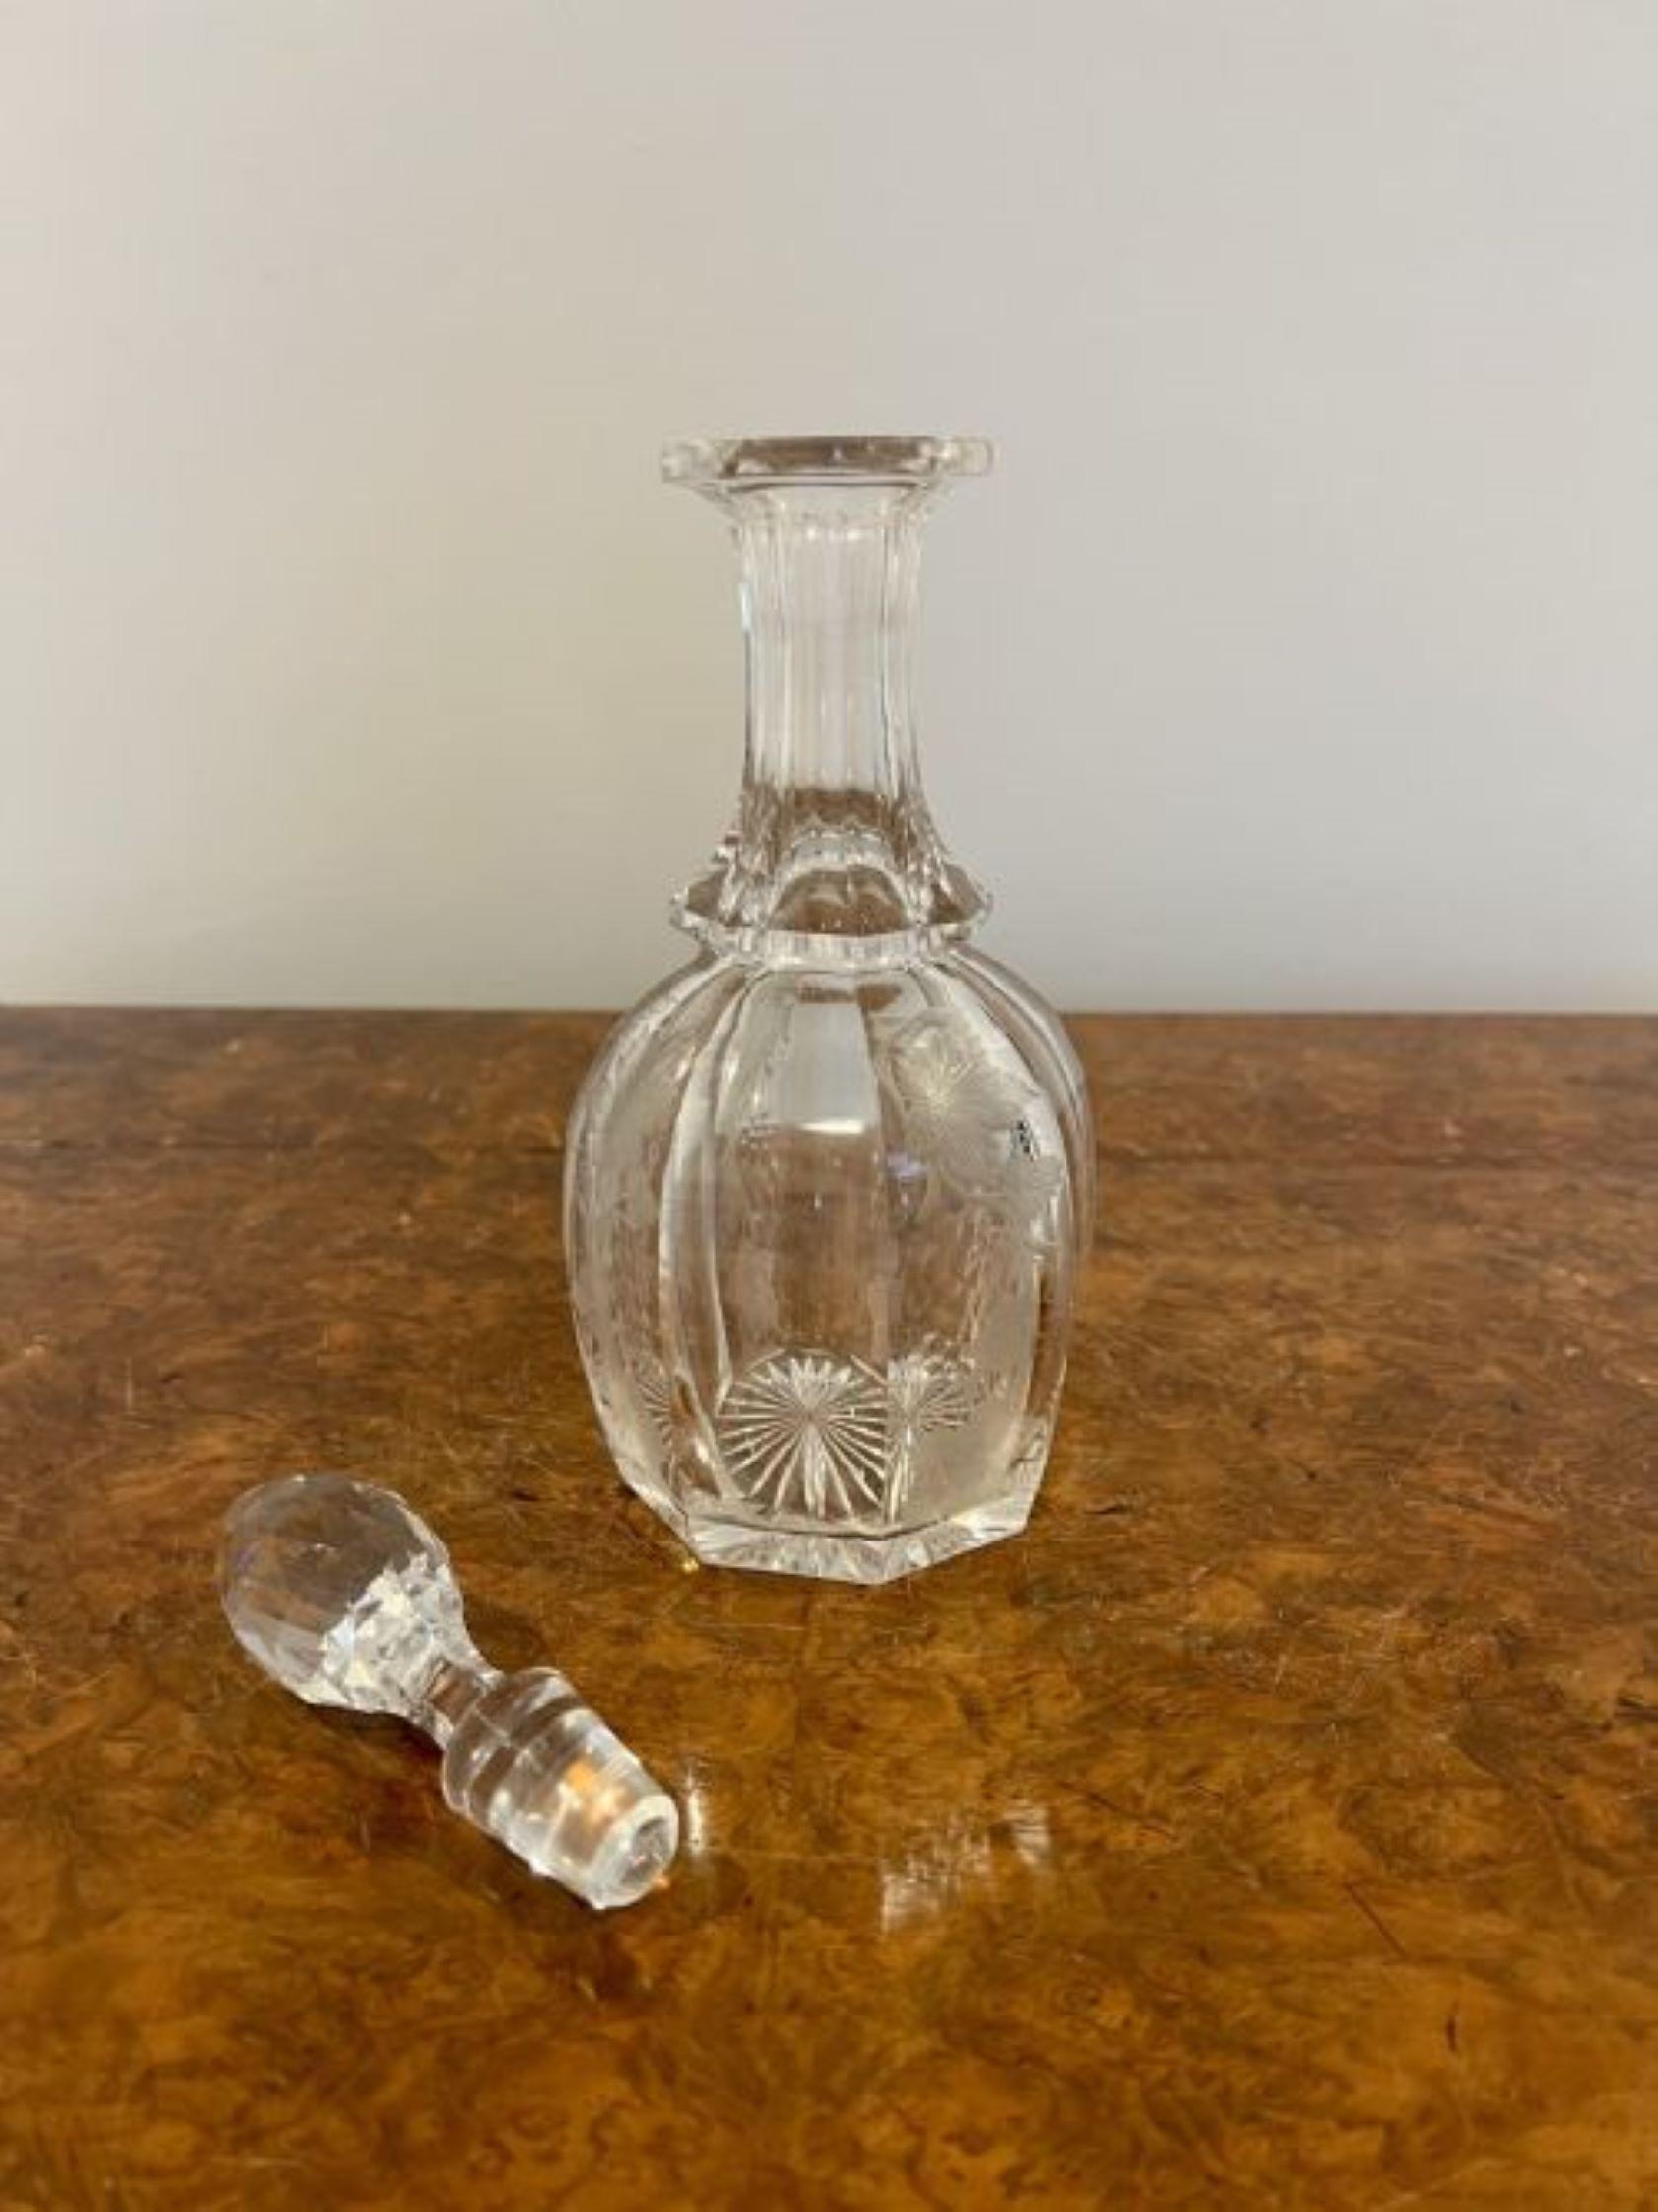 Quality antique victorian engraved decorated glass decanter having a quality antique Victorian decanter engraved with leaves and vines and a cut glass stopper 
Small chip to the neck as pictured